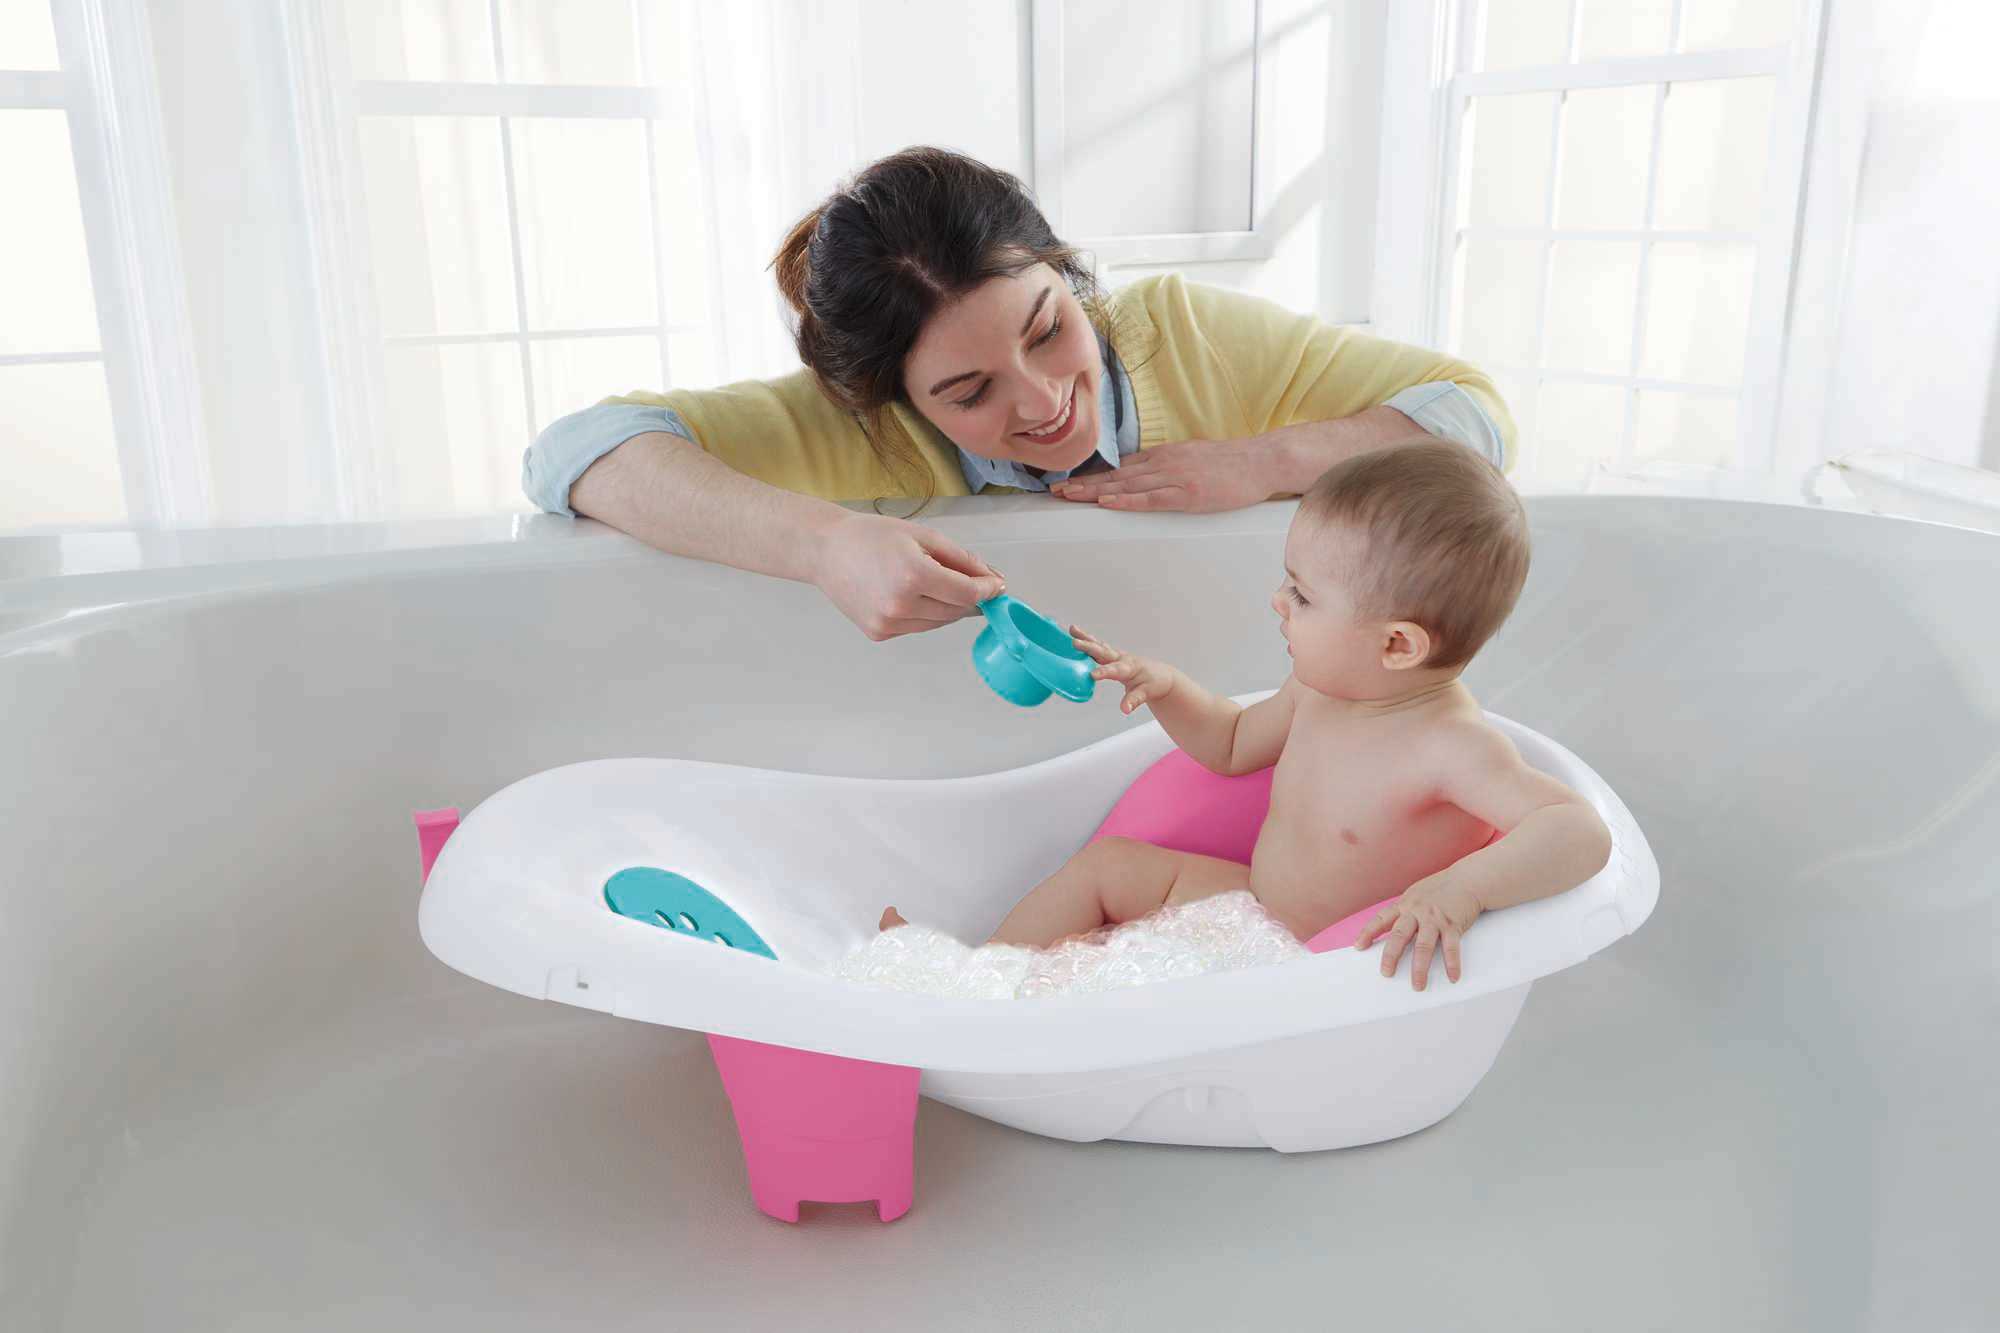 Baby Bath Tubs - The Safest & Most Comfortable